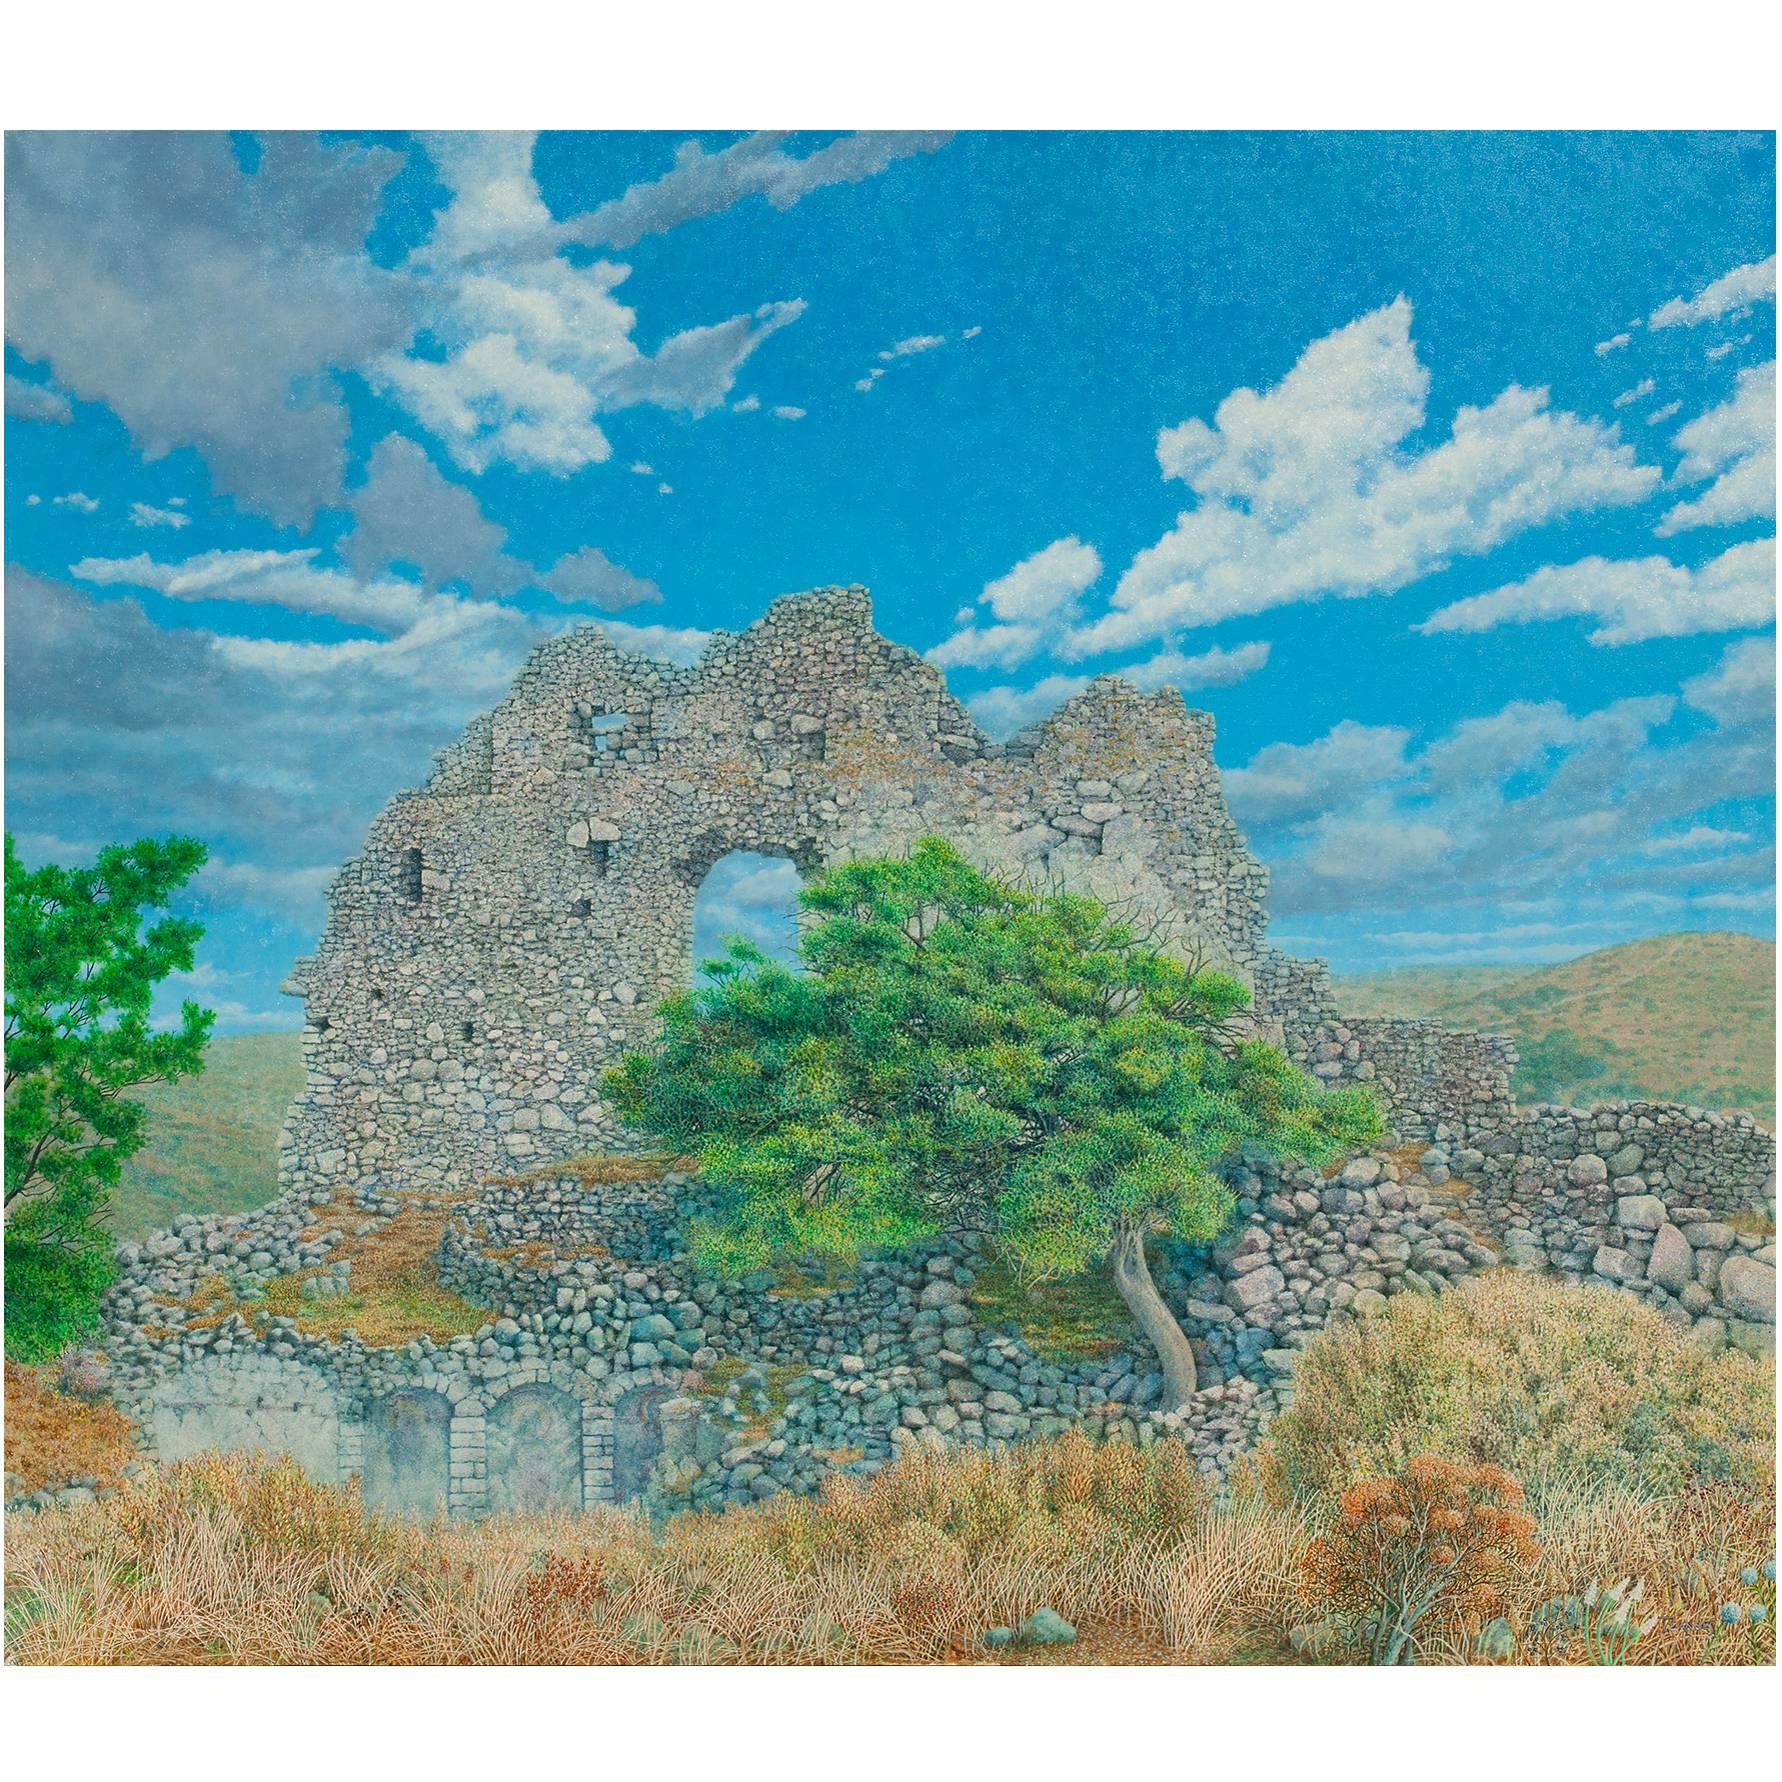 George Tzannes Landscape Painting - Ancient Ruins at Paliochora With Tree - Oil Painting with Archaeological Ruin